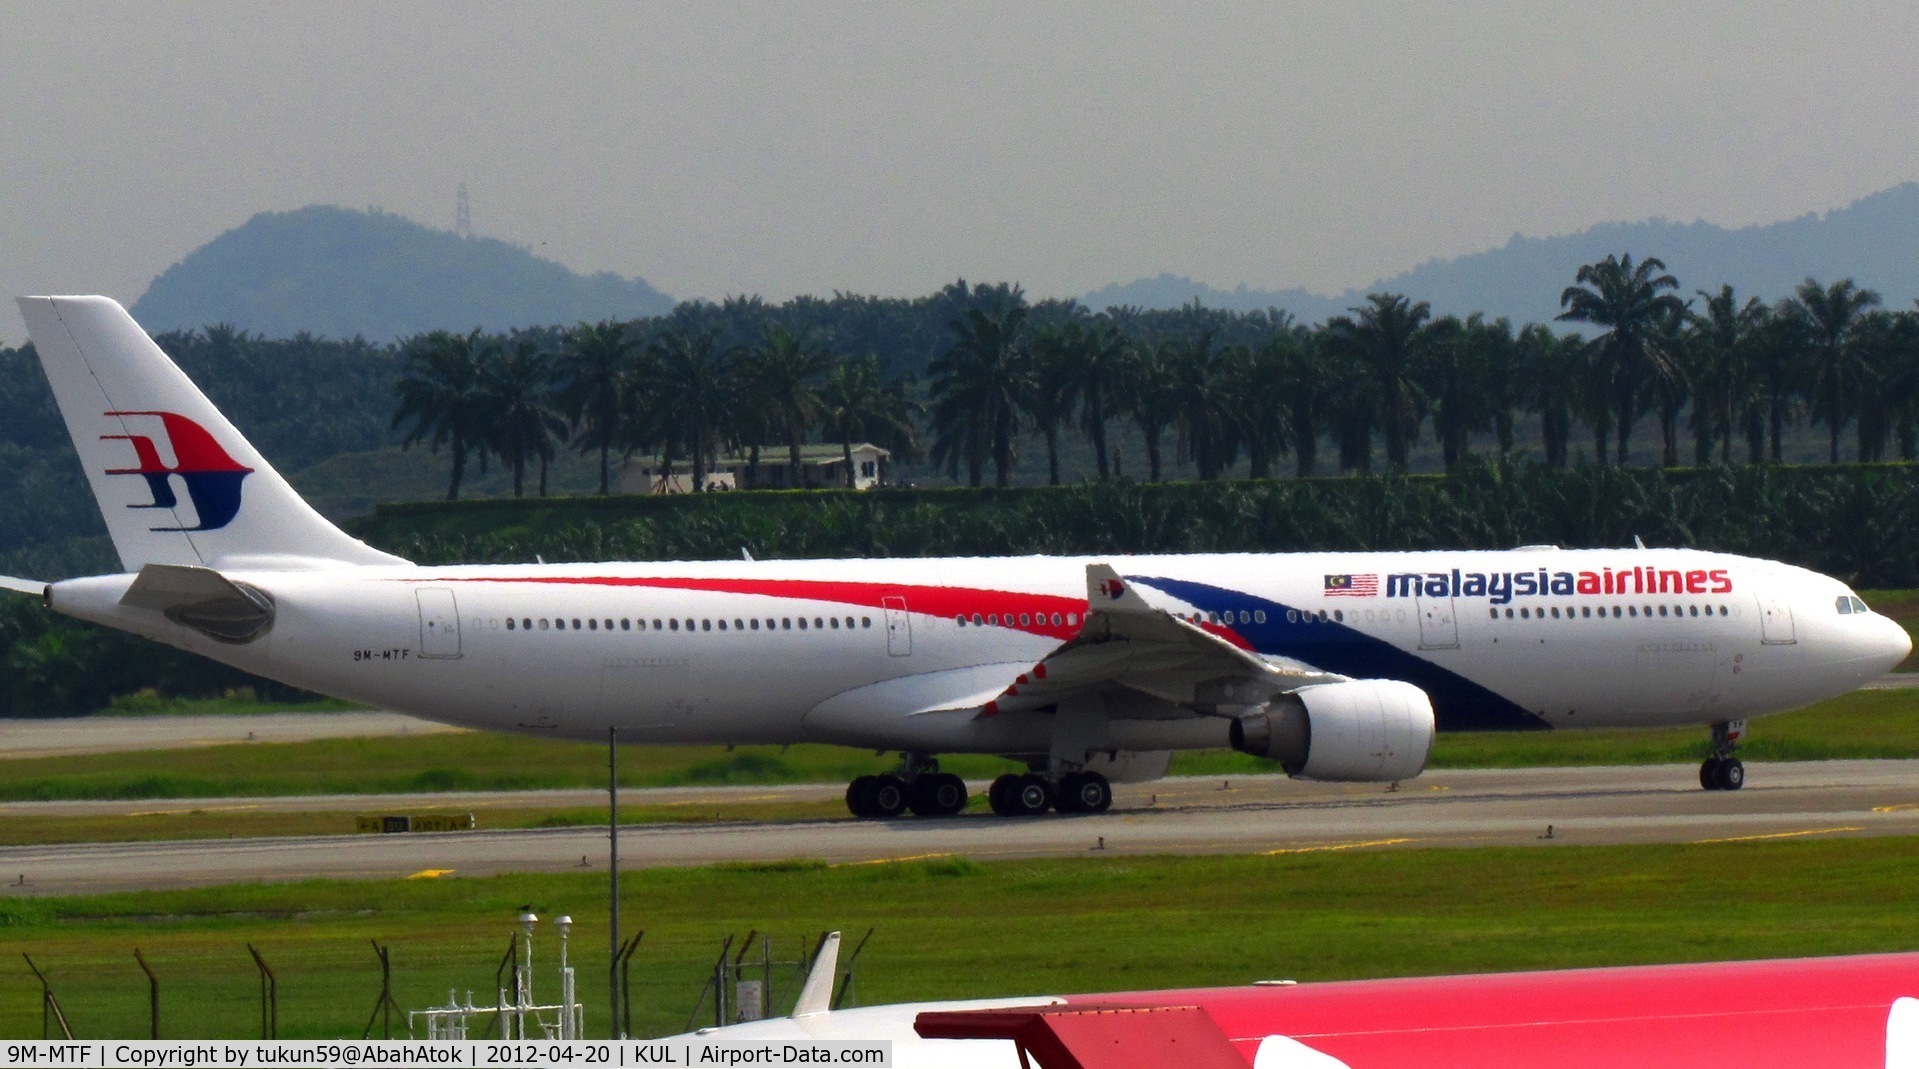 9M-MTF, 2012 Airbus A330-323X C/N 1281, Malaysia Airlines